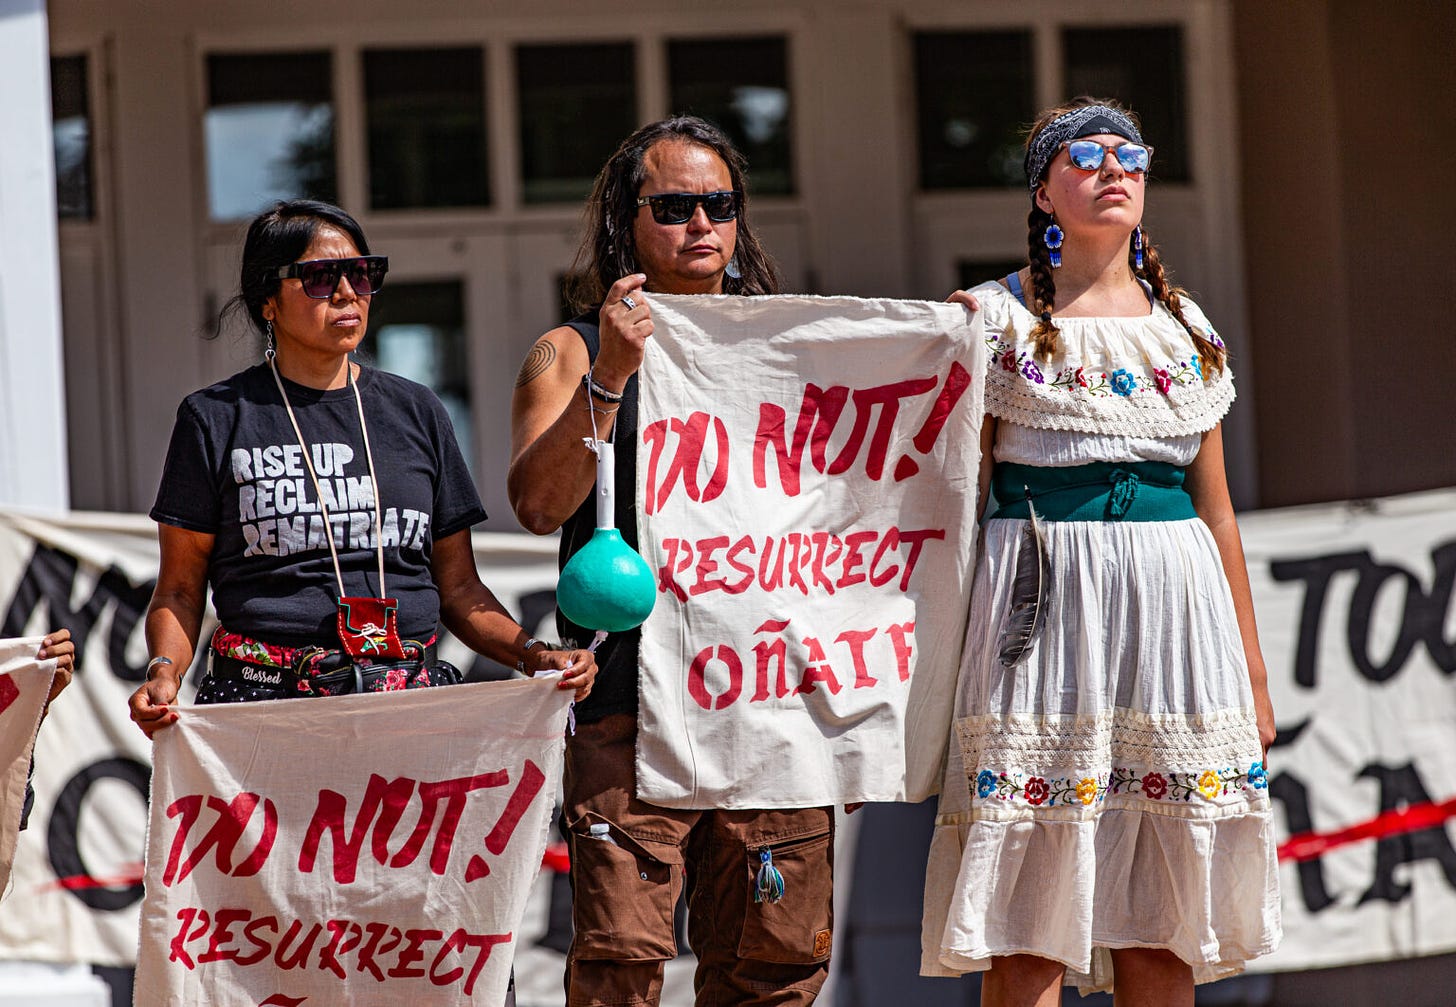 Three people stand side-by-side, some holding signs that say "Do Not! Resurrect Oñate"